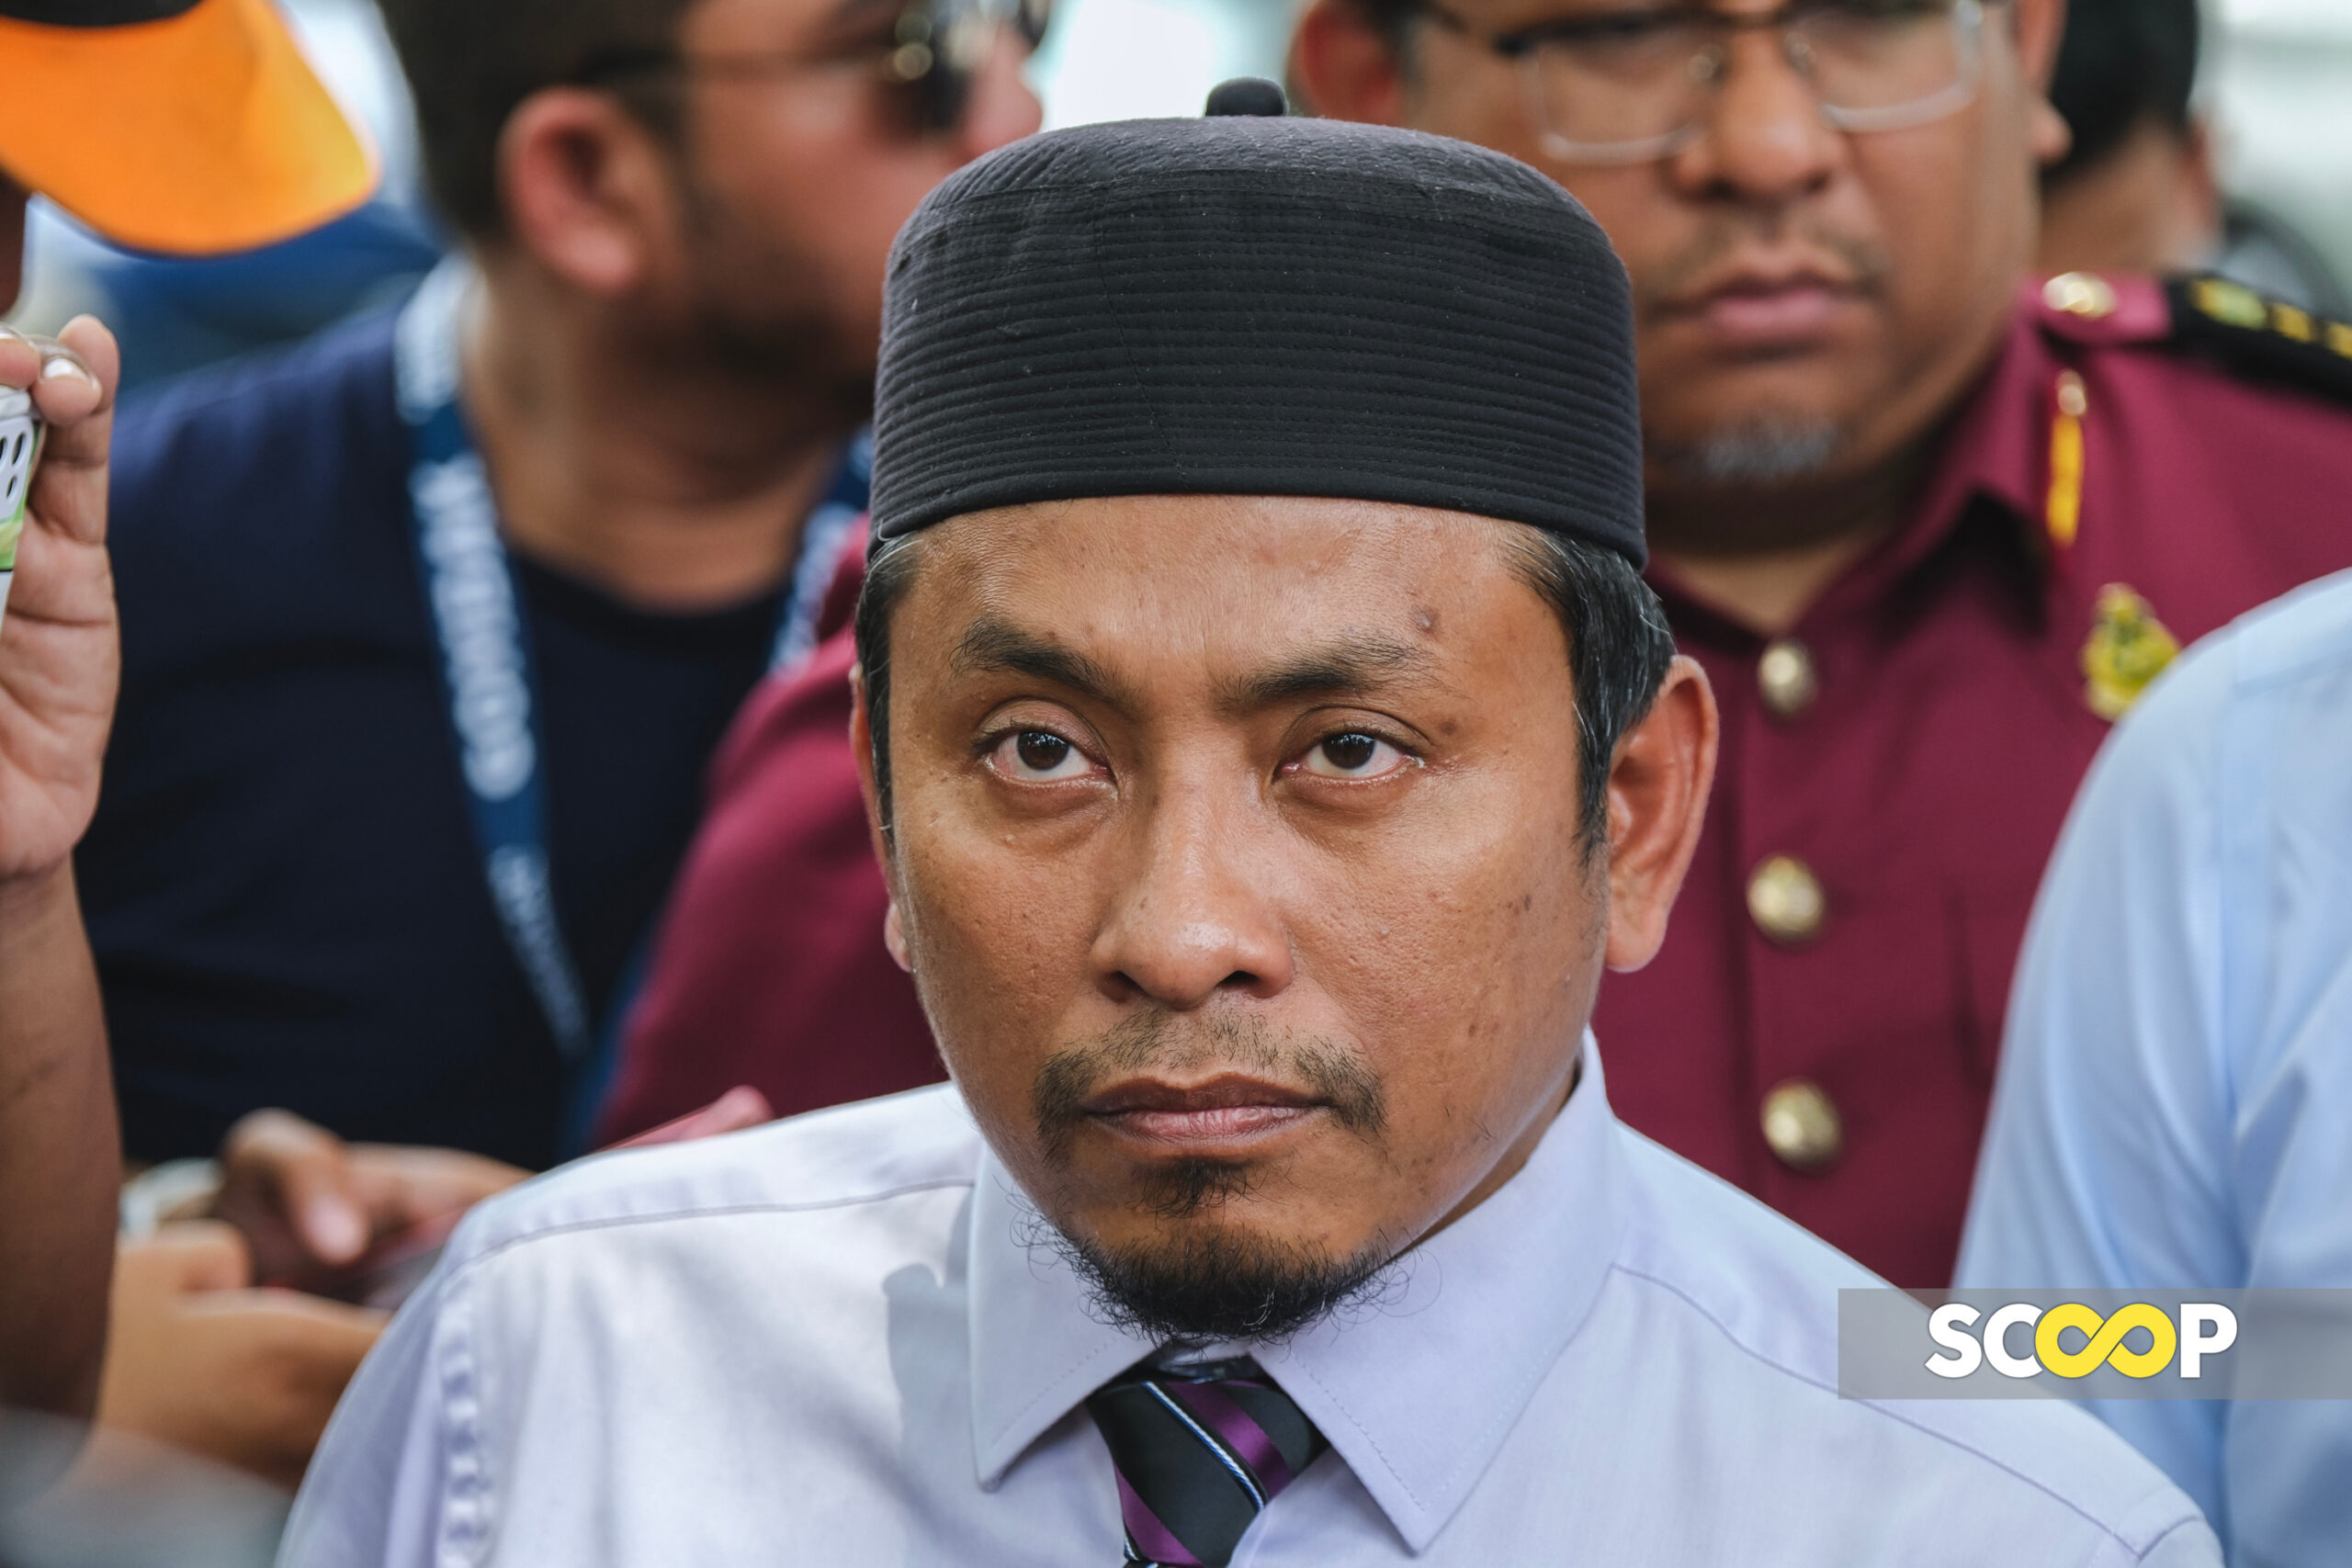 Umno has strong chance against Bersatu if by-elections held: PAS info chief